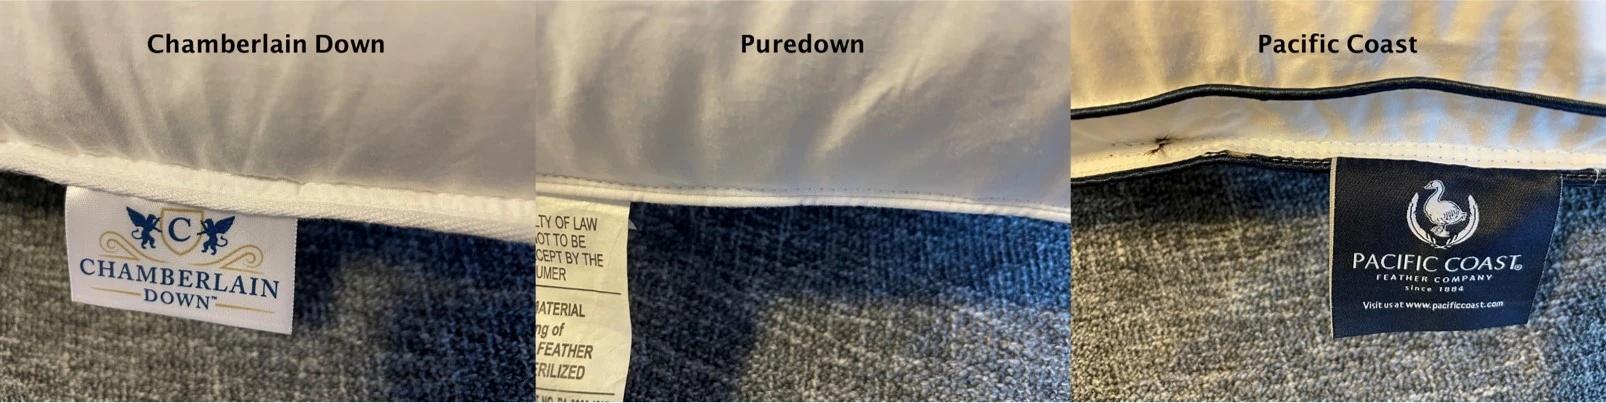 https://pillowspecialist.com/img/down-and-feather-pillow-seam-comparison.webp